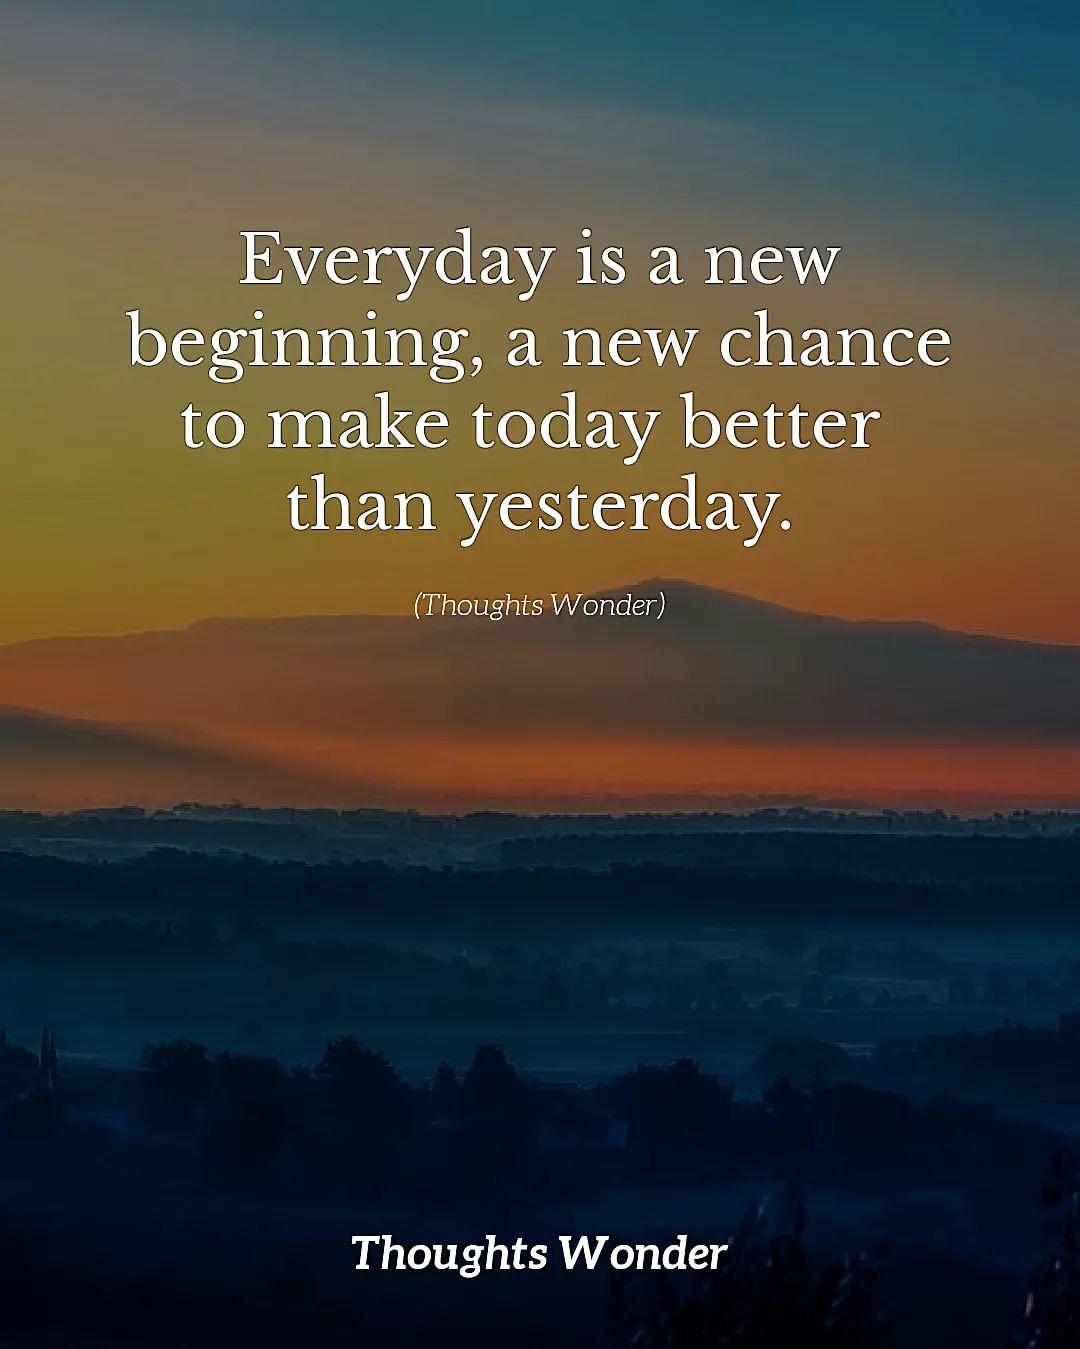 Everyday is a new beginning, a new chance to make today better than yesterday.